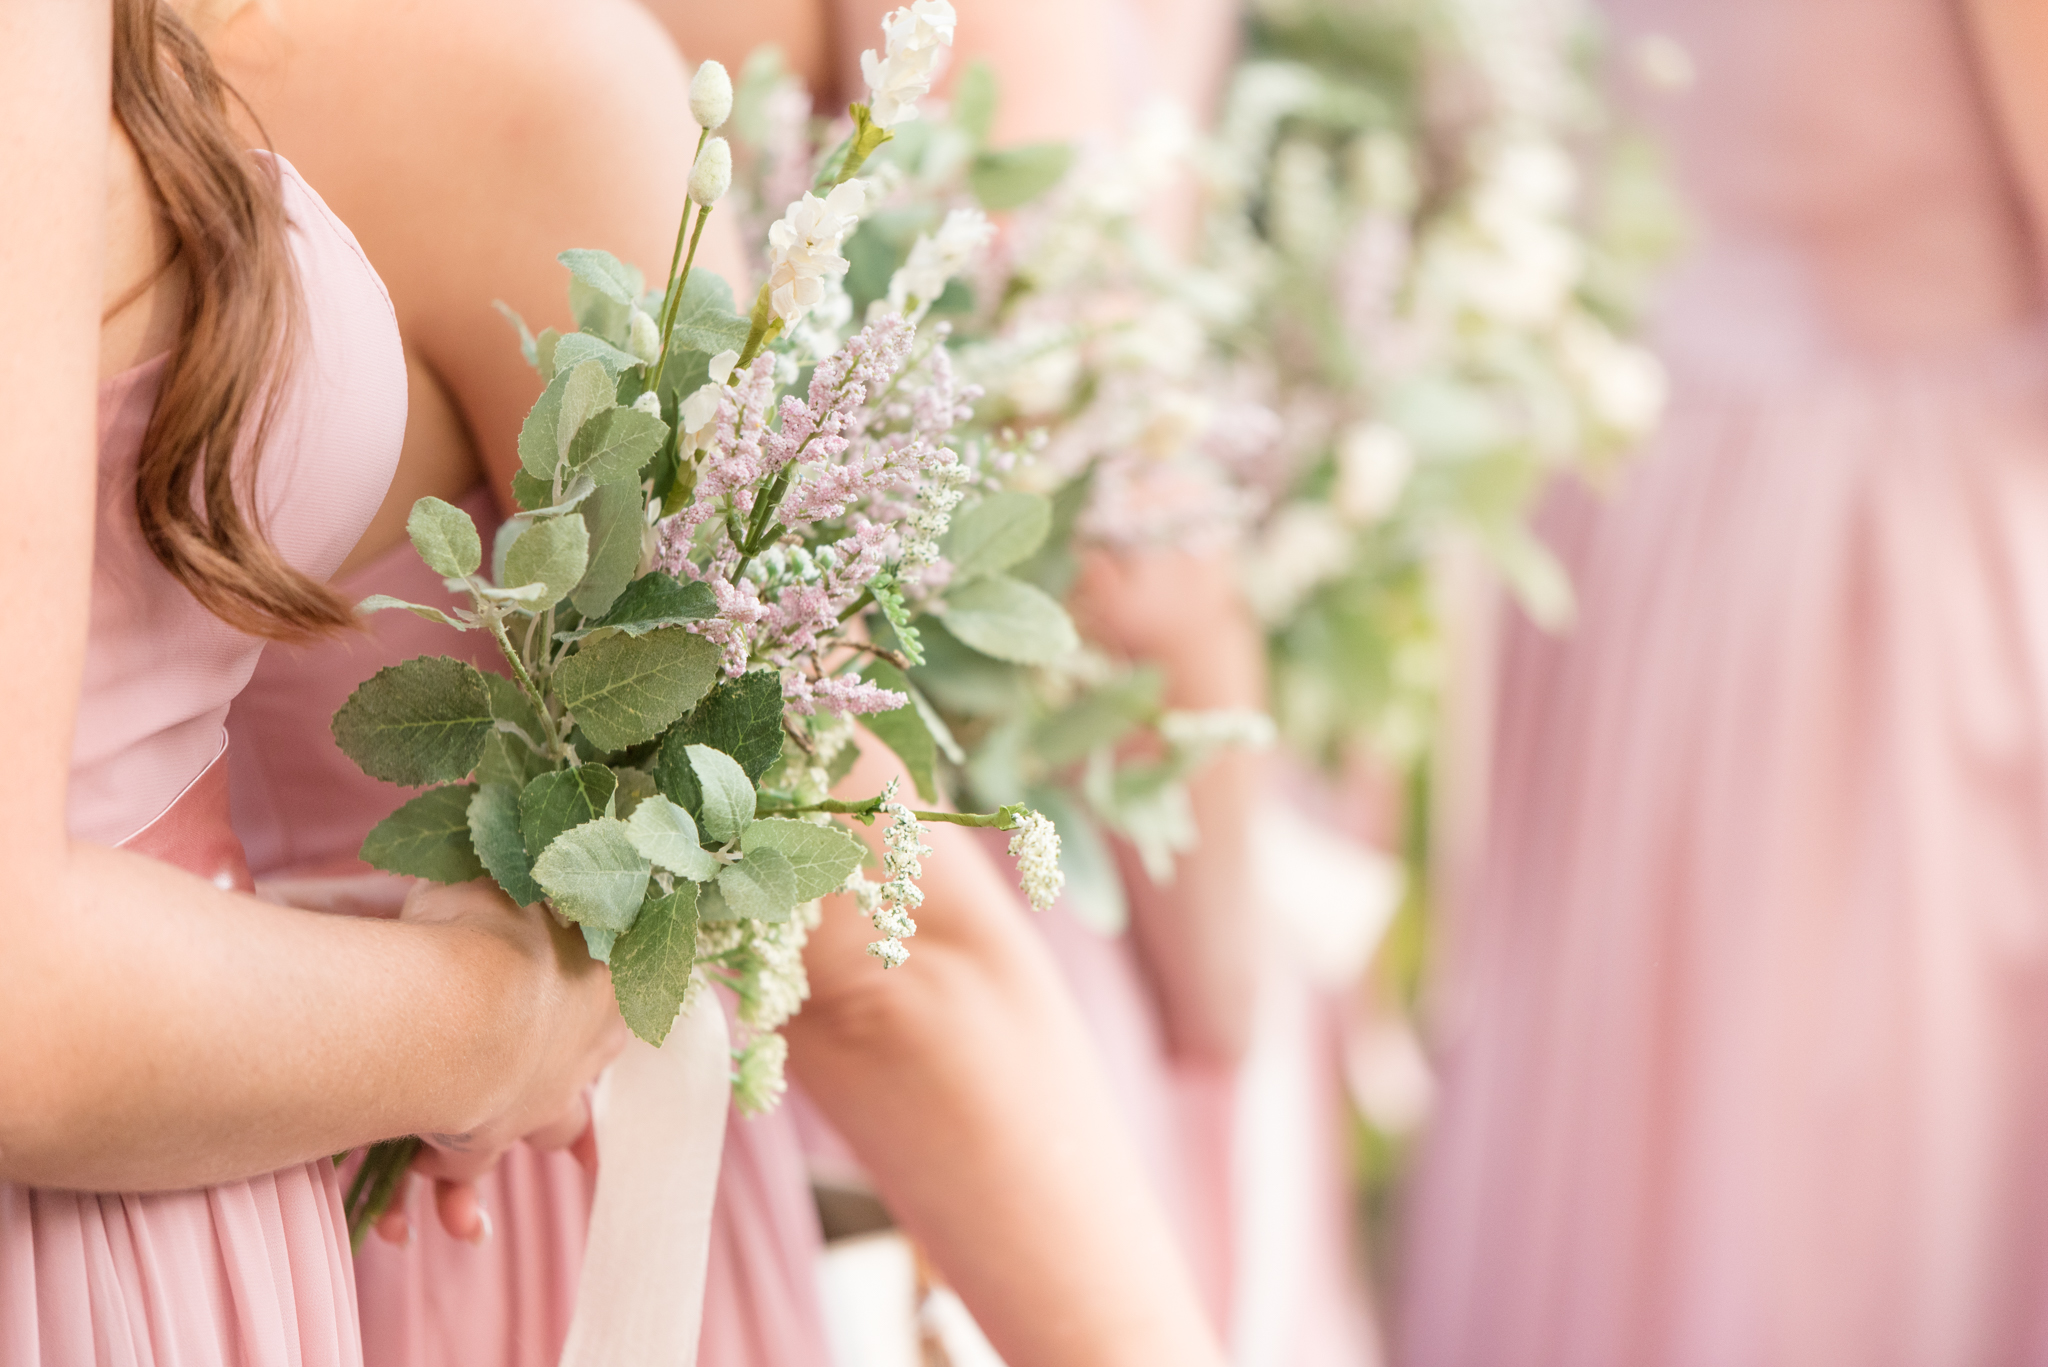 Bridesmaids hold flowers during ceremony.